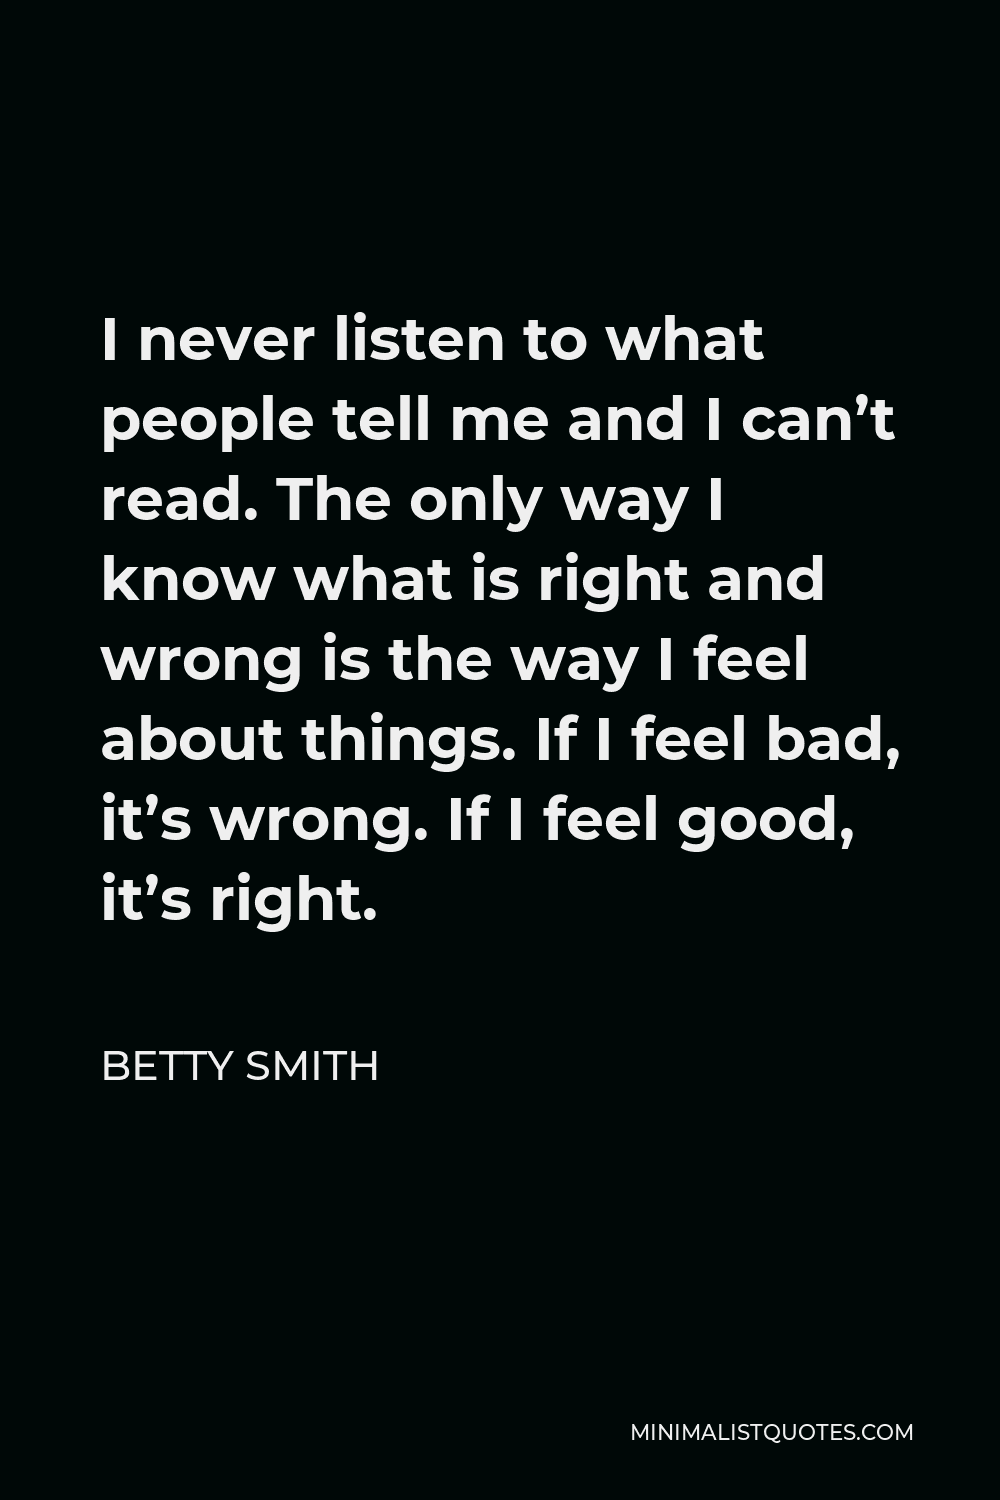 Betty Smith Quote - I never listen to what people tell me and I can’t read. The only way I know what is right and wrong is the way I feel about things. If I feel bad, it’s wrong. If I feel good, it’s right.